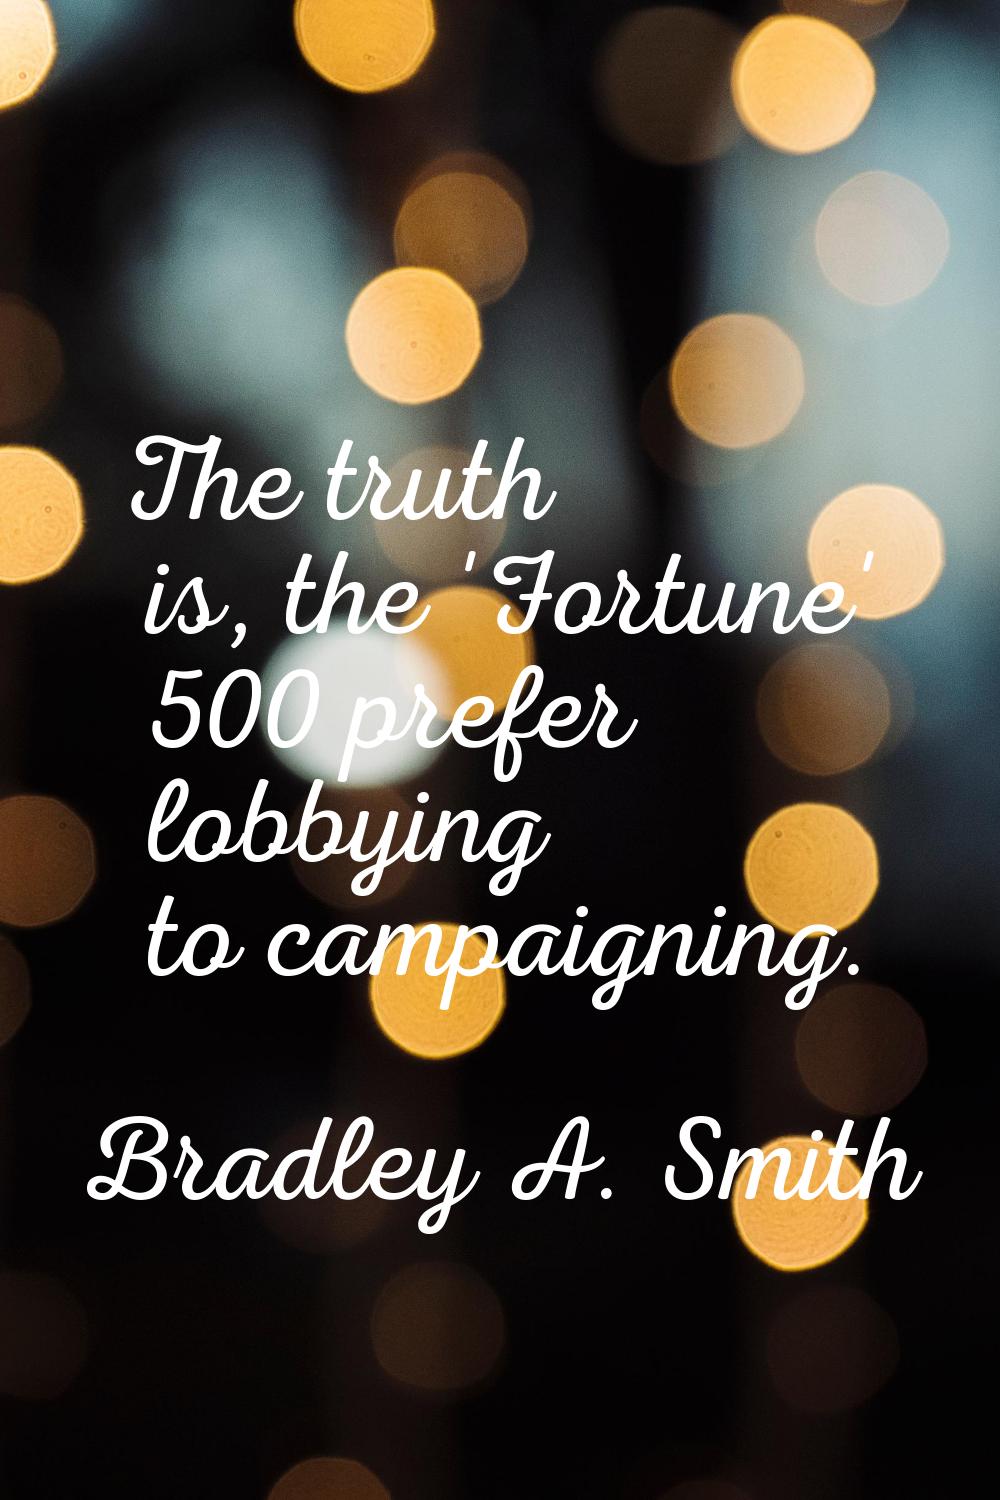 The truth is, the 'Fortune' 500 prefer lobbying to campaigning.